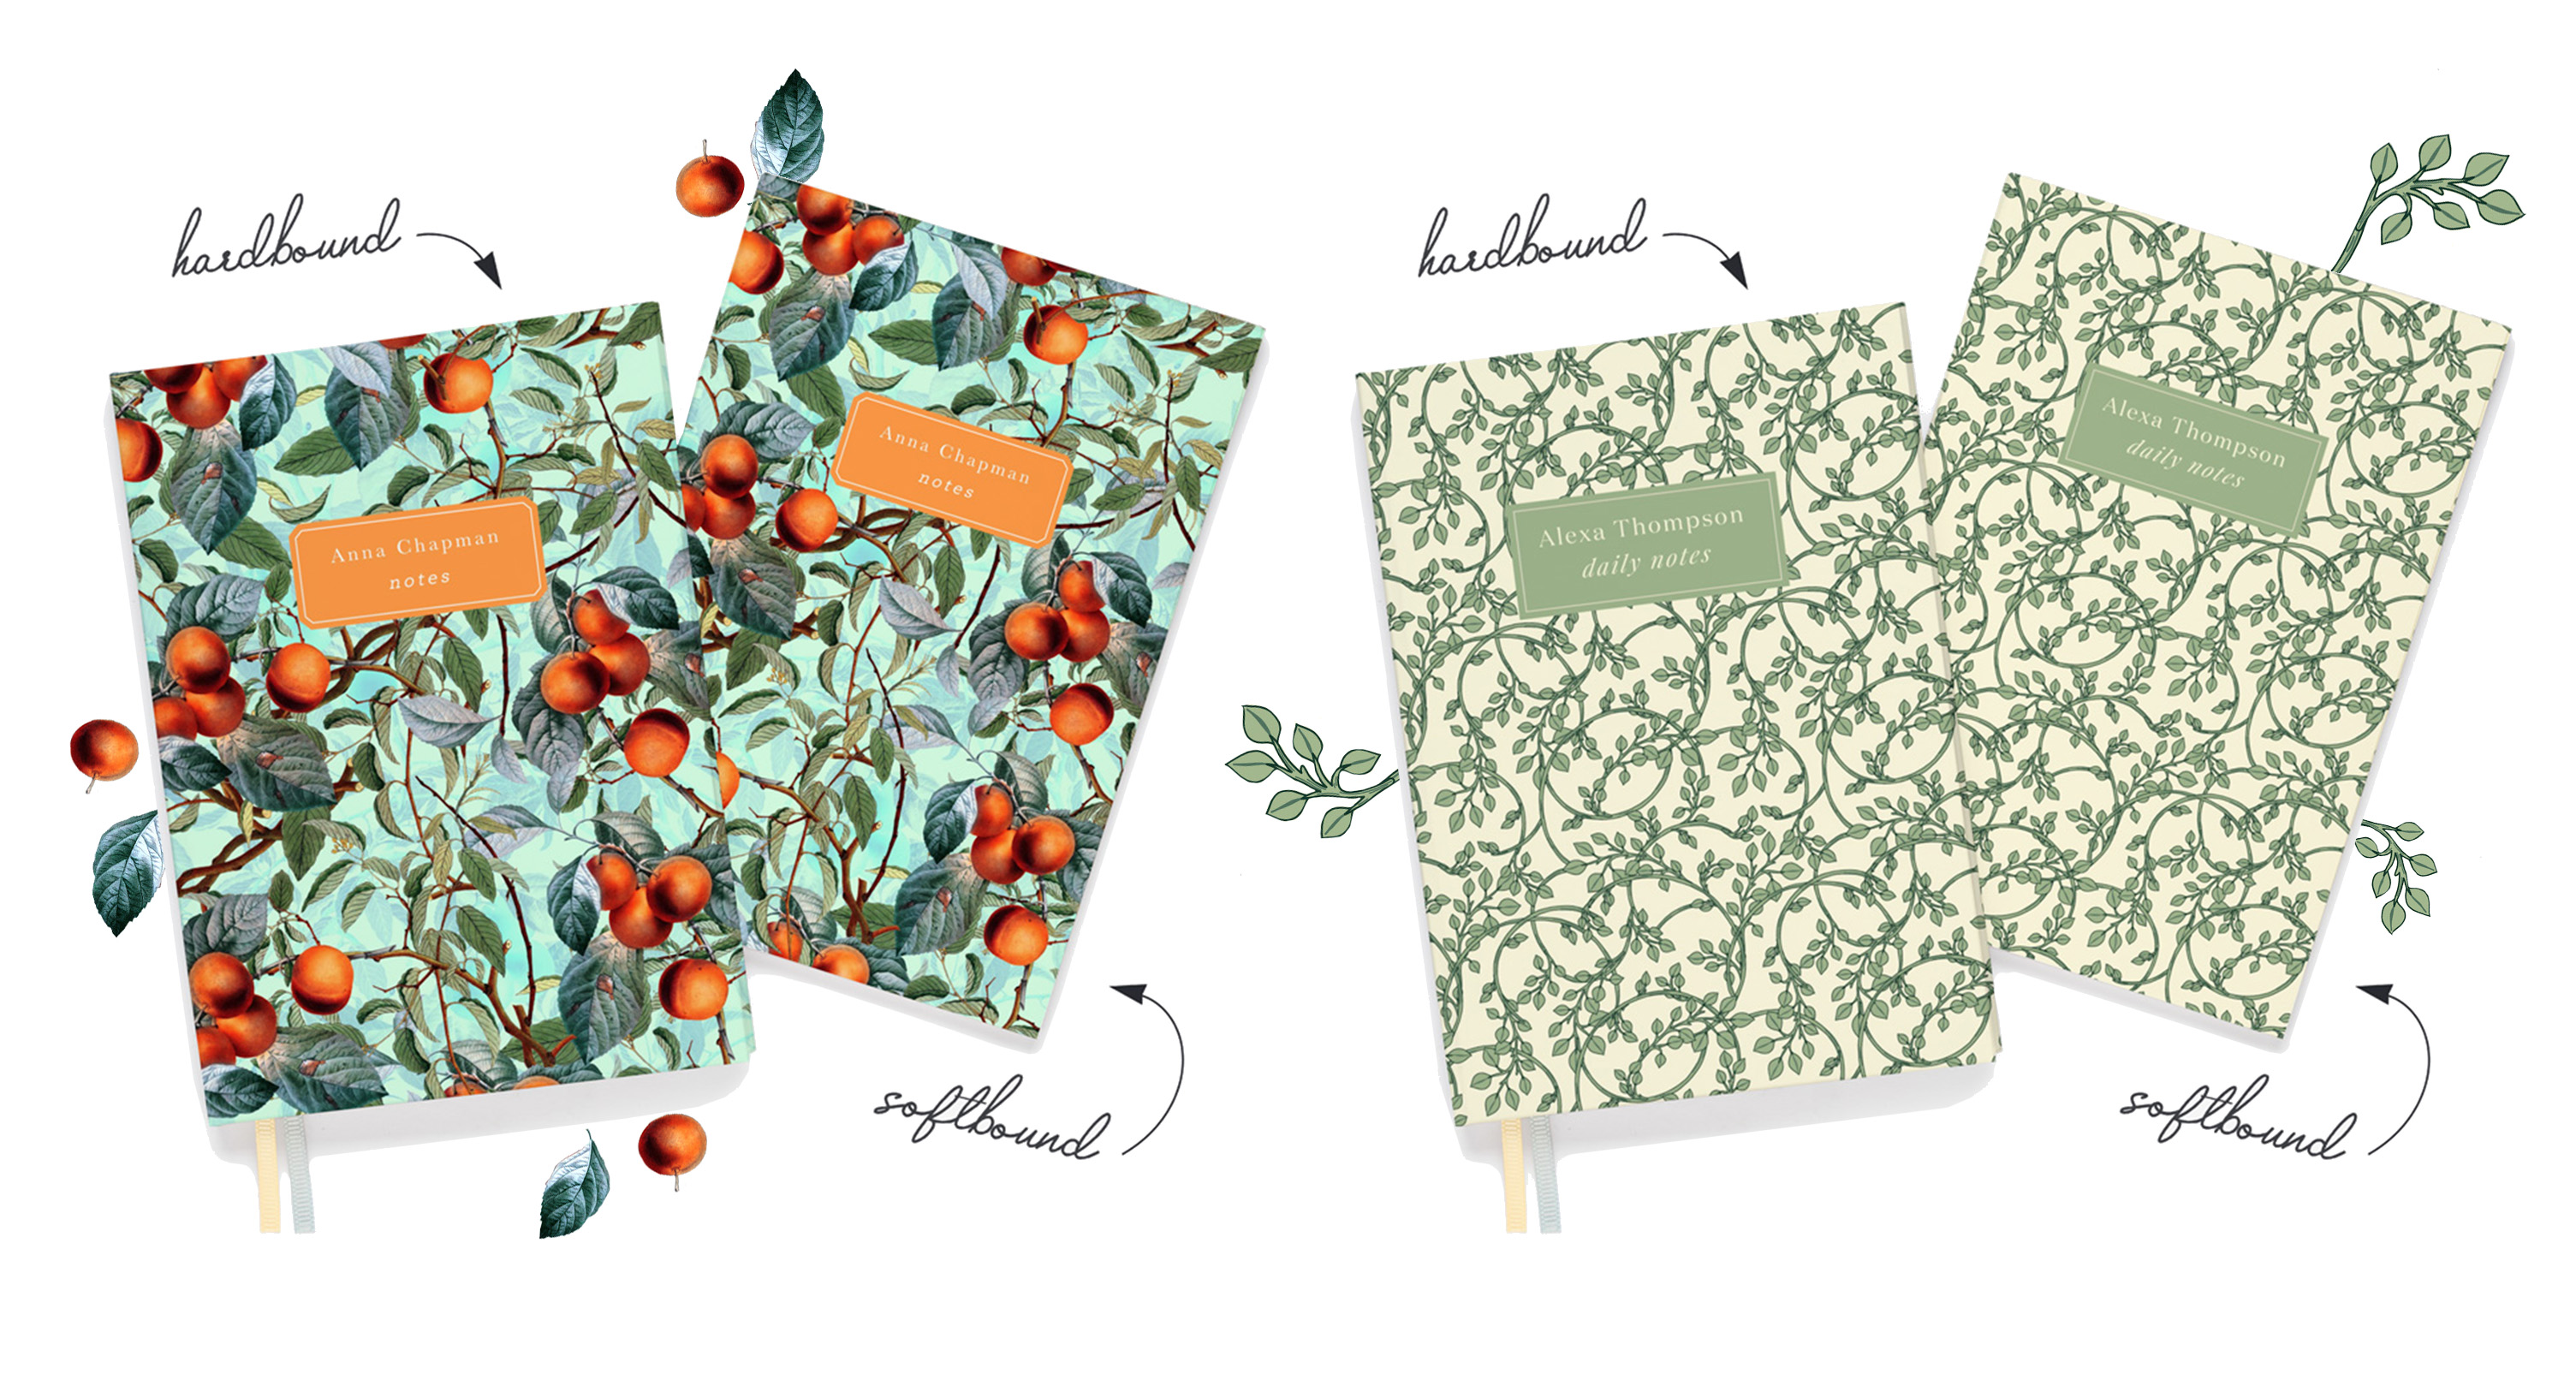 Winter Oranges and Ornamental Leaves notebooks in hardbound and softbound with text to indicate the difference